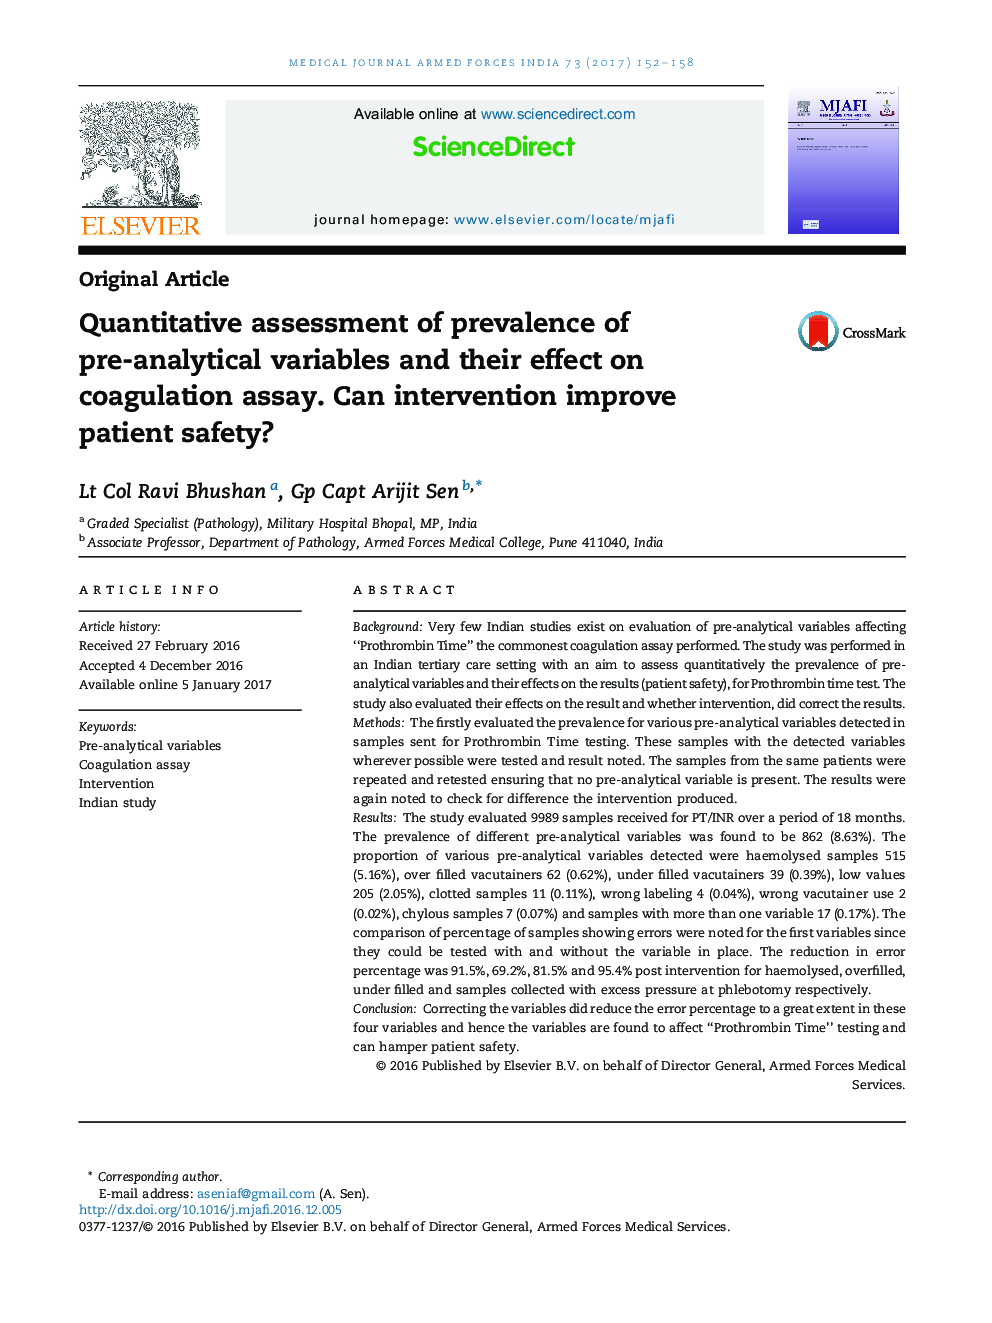 Quantitative assessment of prevalence of pre-analytical variables and their effect on coagulation assay. Can intervention improve patient safety?